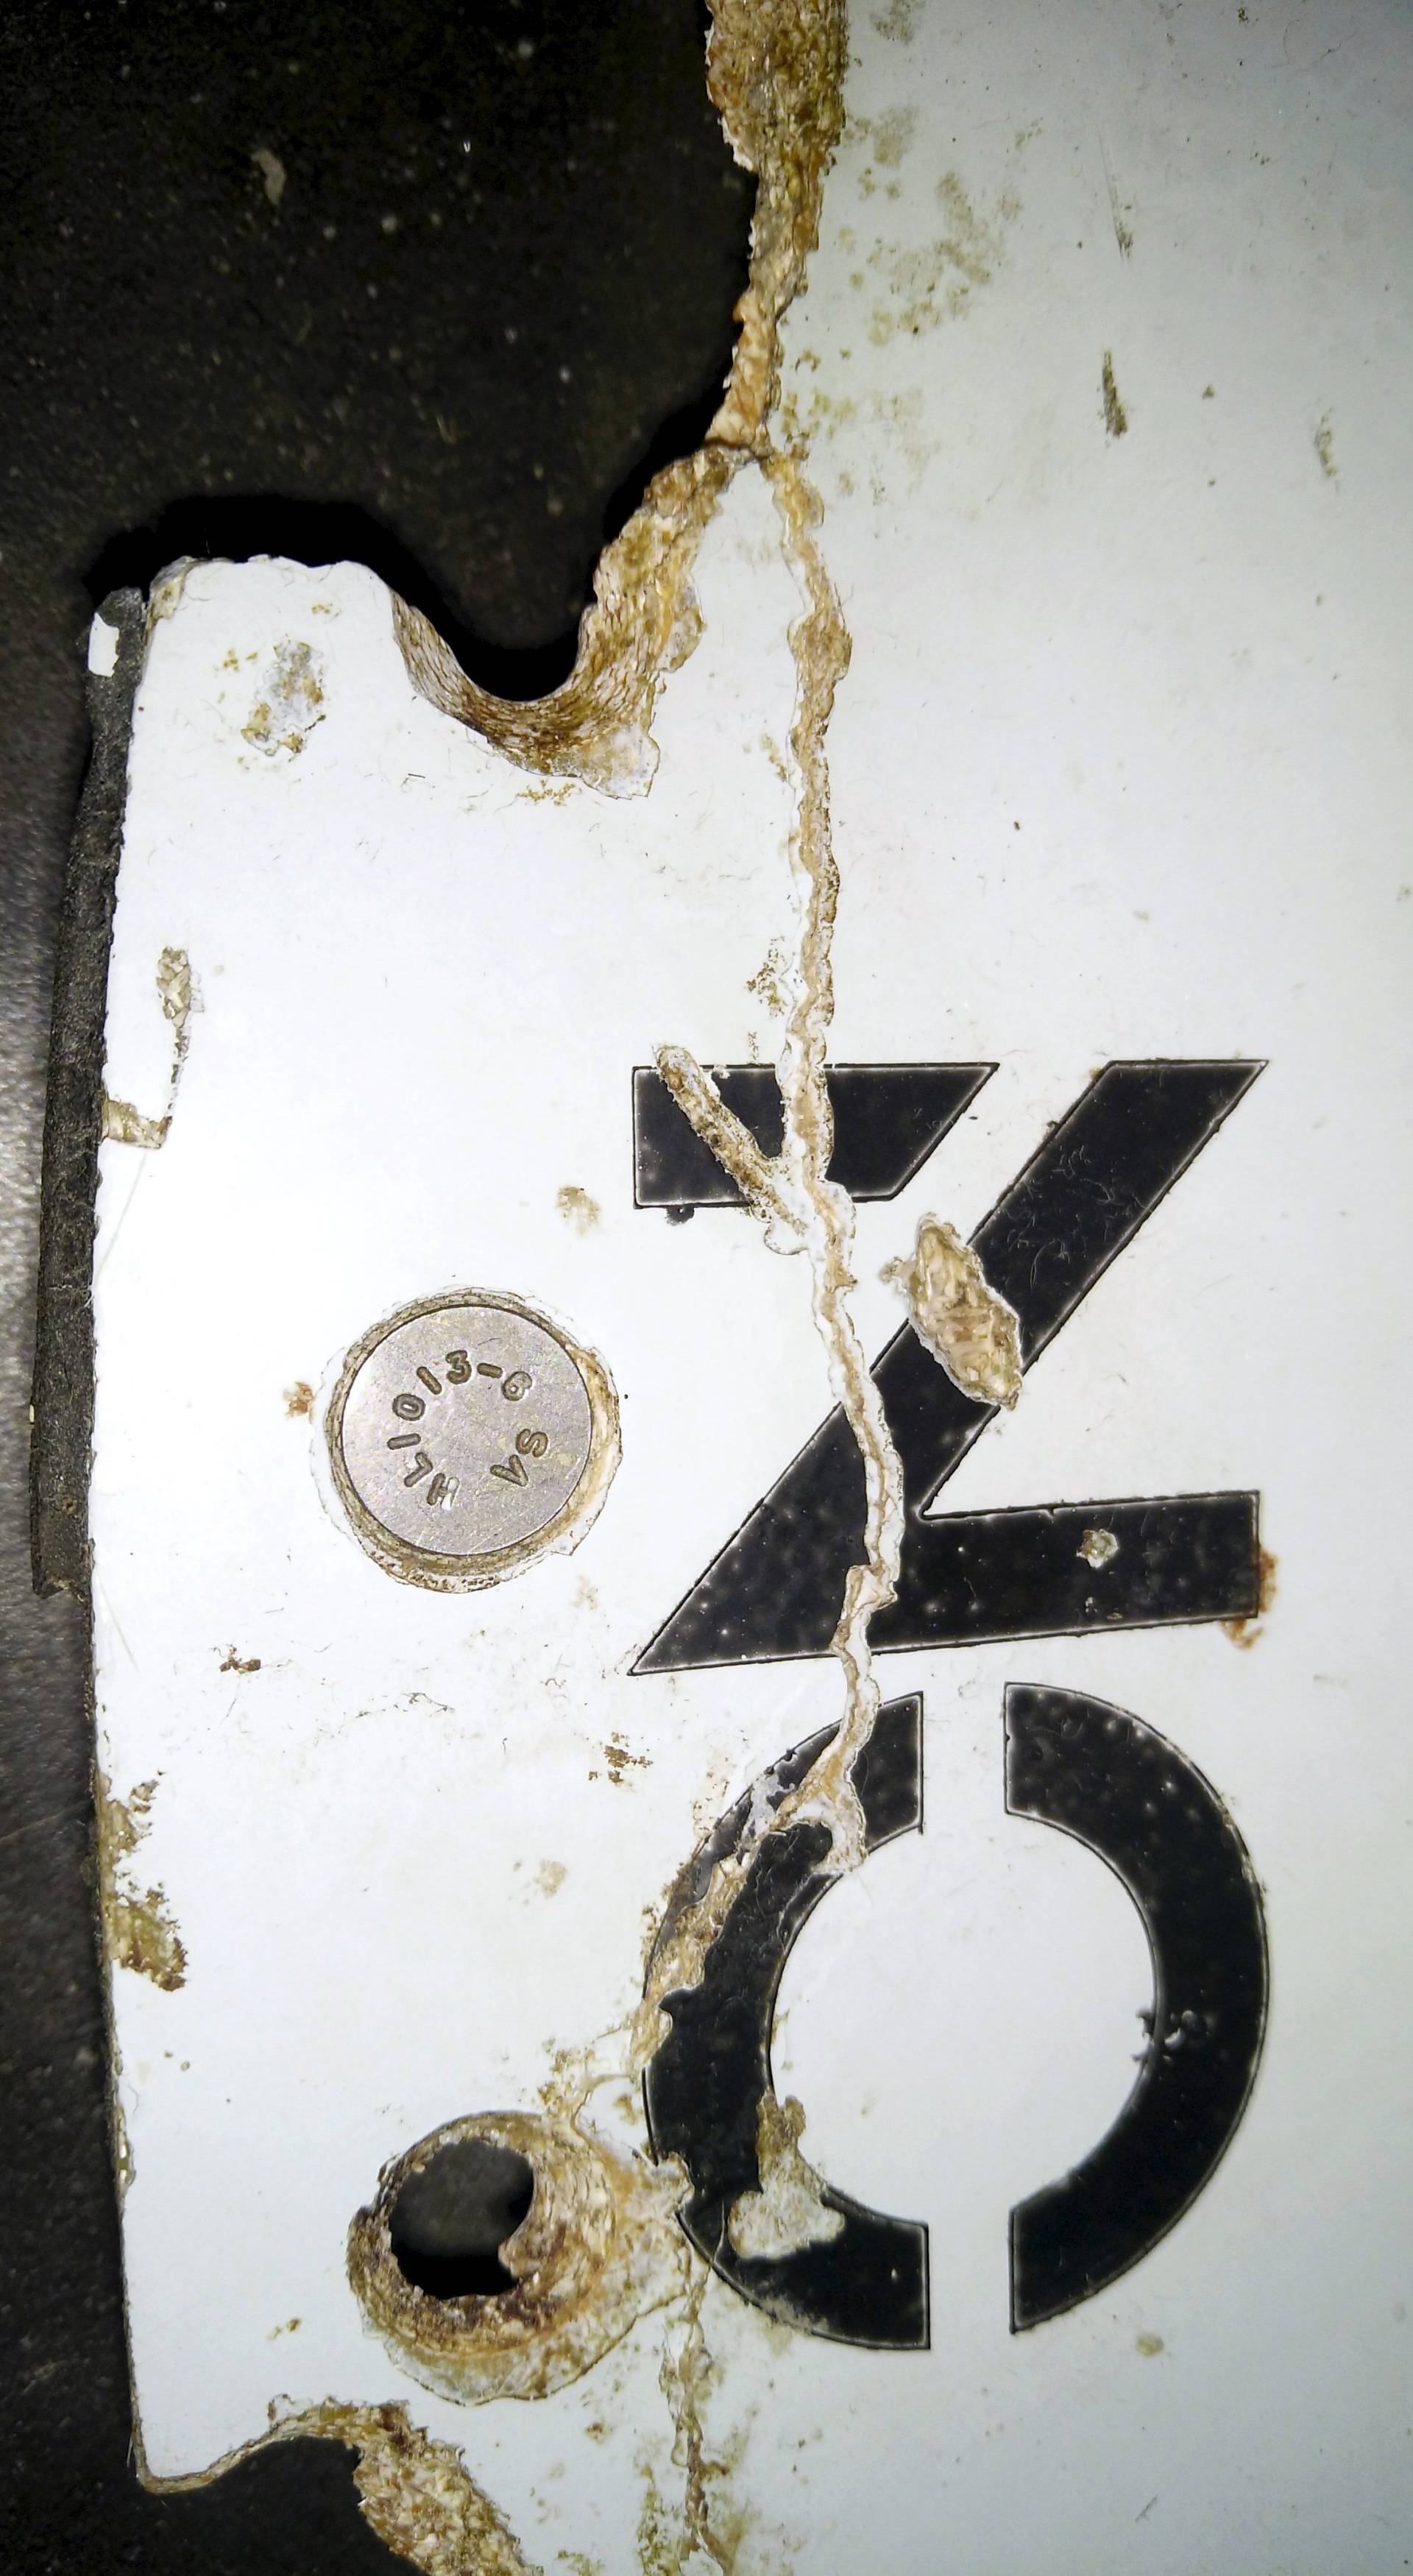 A photograph of debris thought to be from the missing Malaysian Airlines MH370 plane